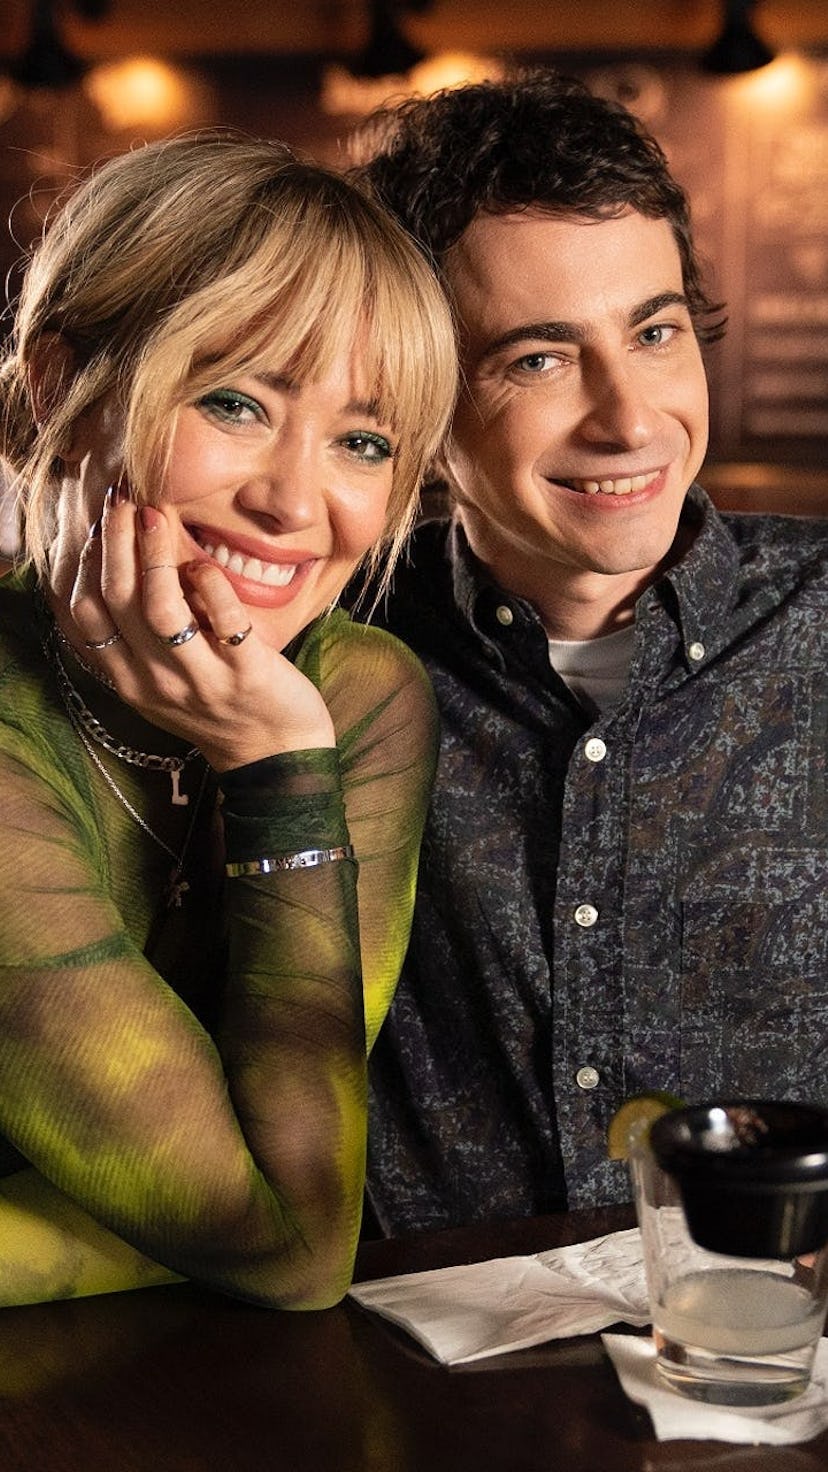 A behind the scenes photo from the lizzie mcguire revival with Hillary Duff and Adam lamberg